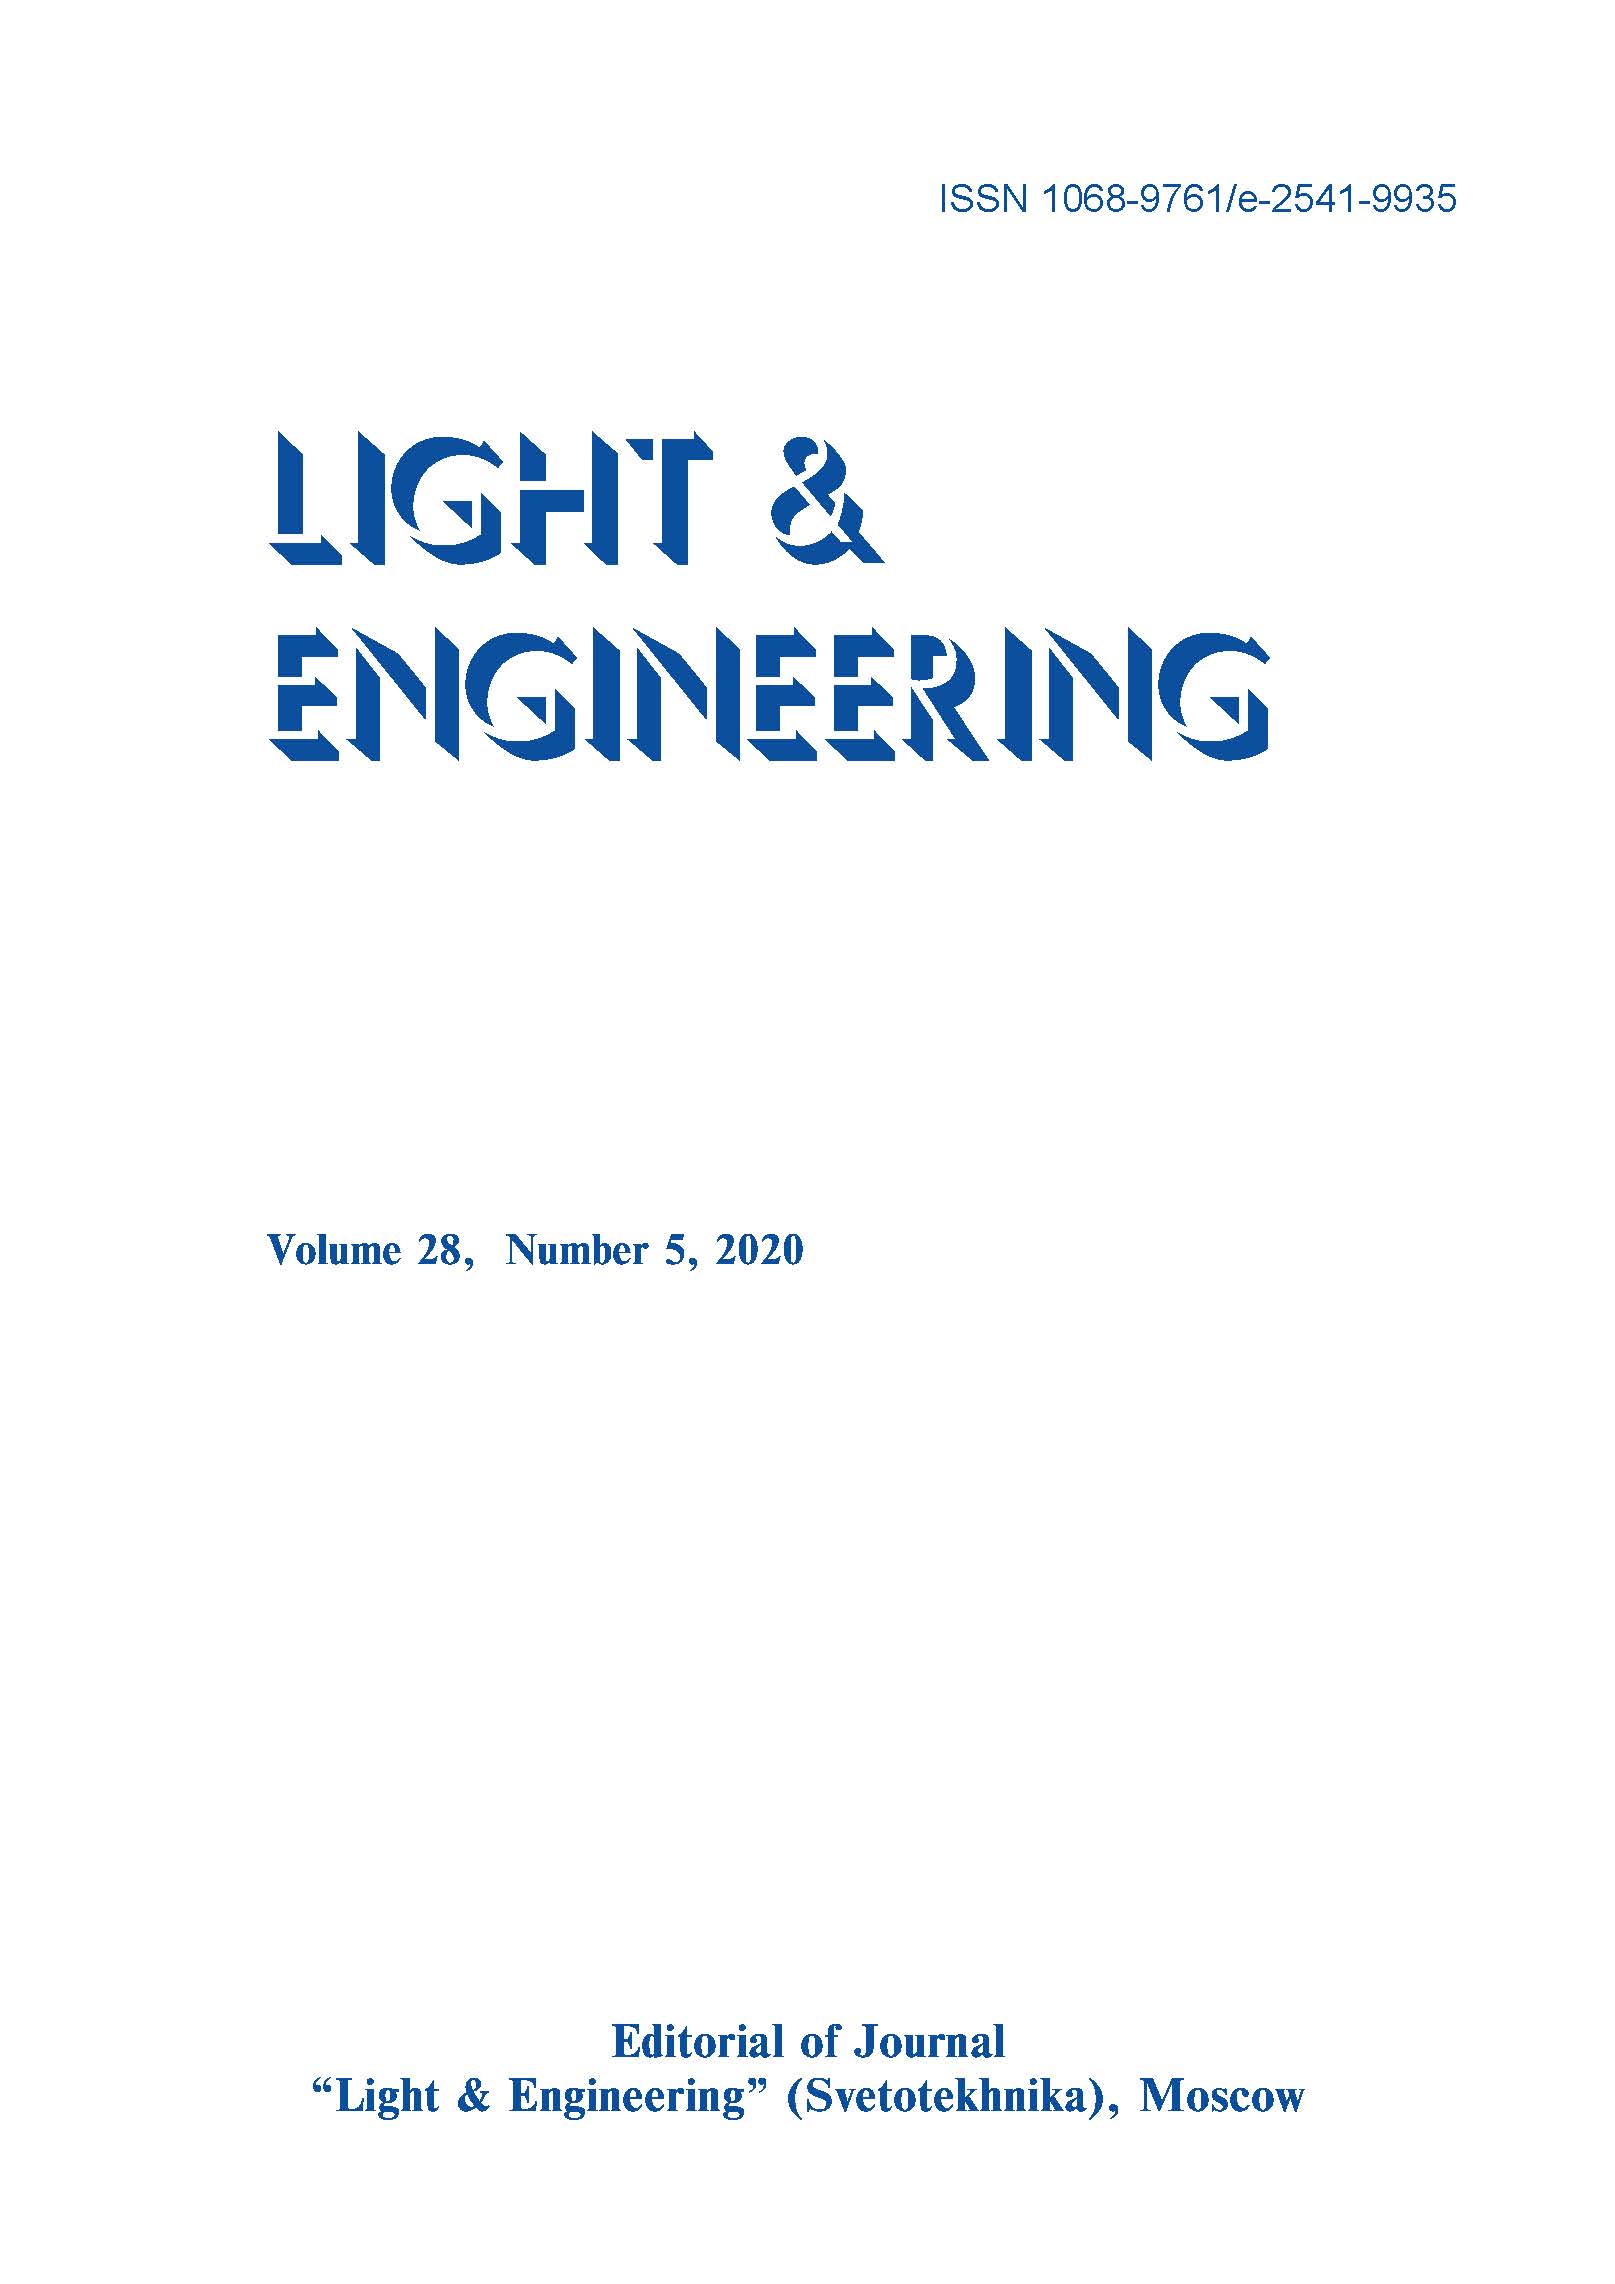 The Influence Of The Led Luminaires Electrical Parameters On Their Correlated Colour Temperature During Operation Mode Light & Engineering Vol. 28, No. 5